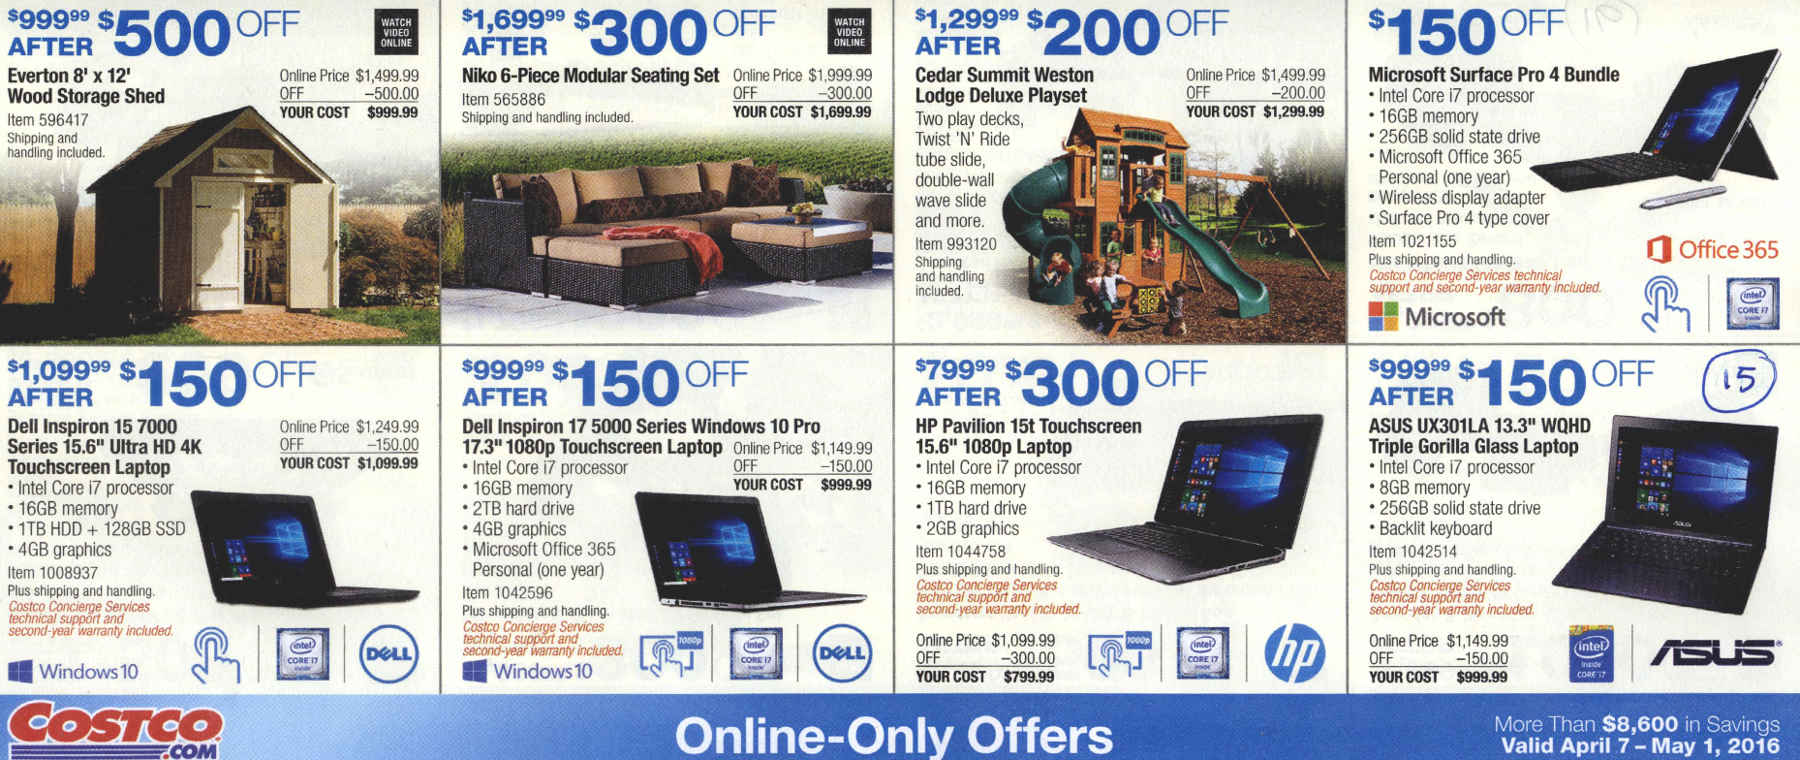 Coupon book full size page -> 15 <-